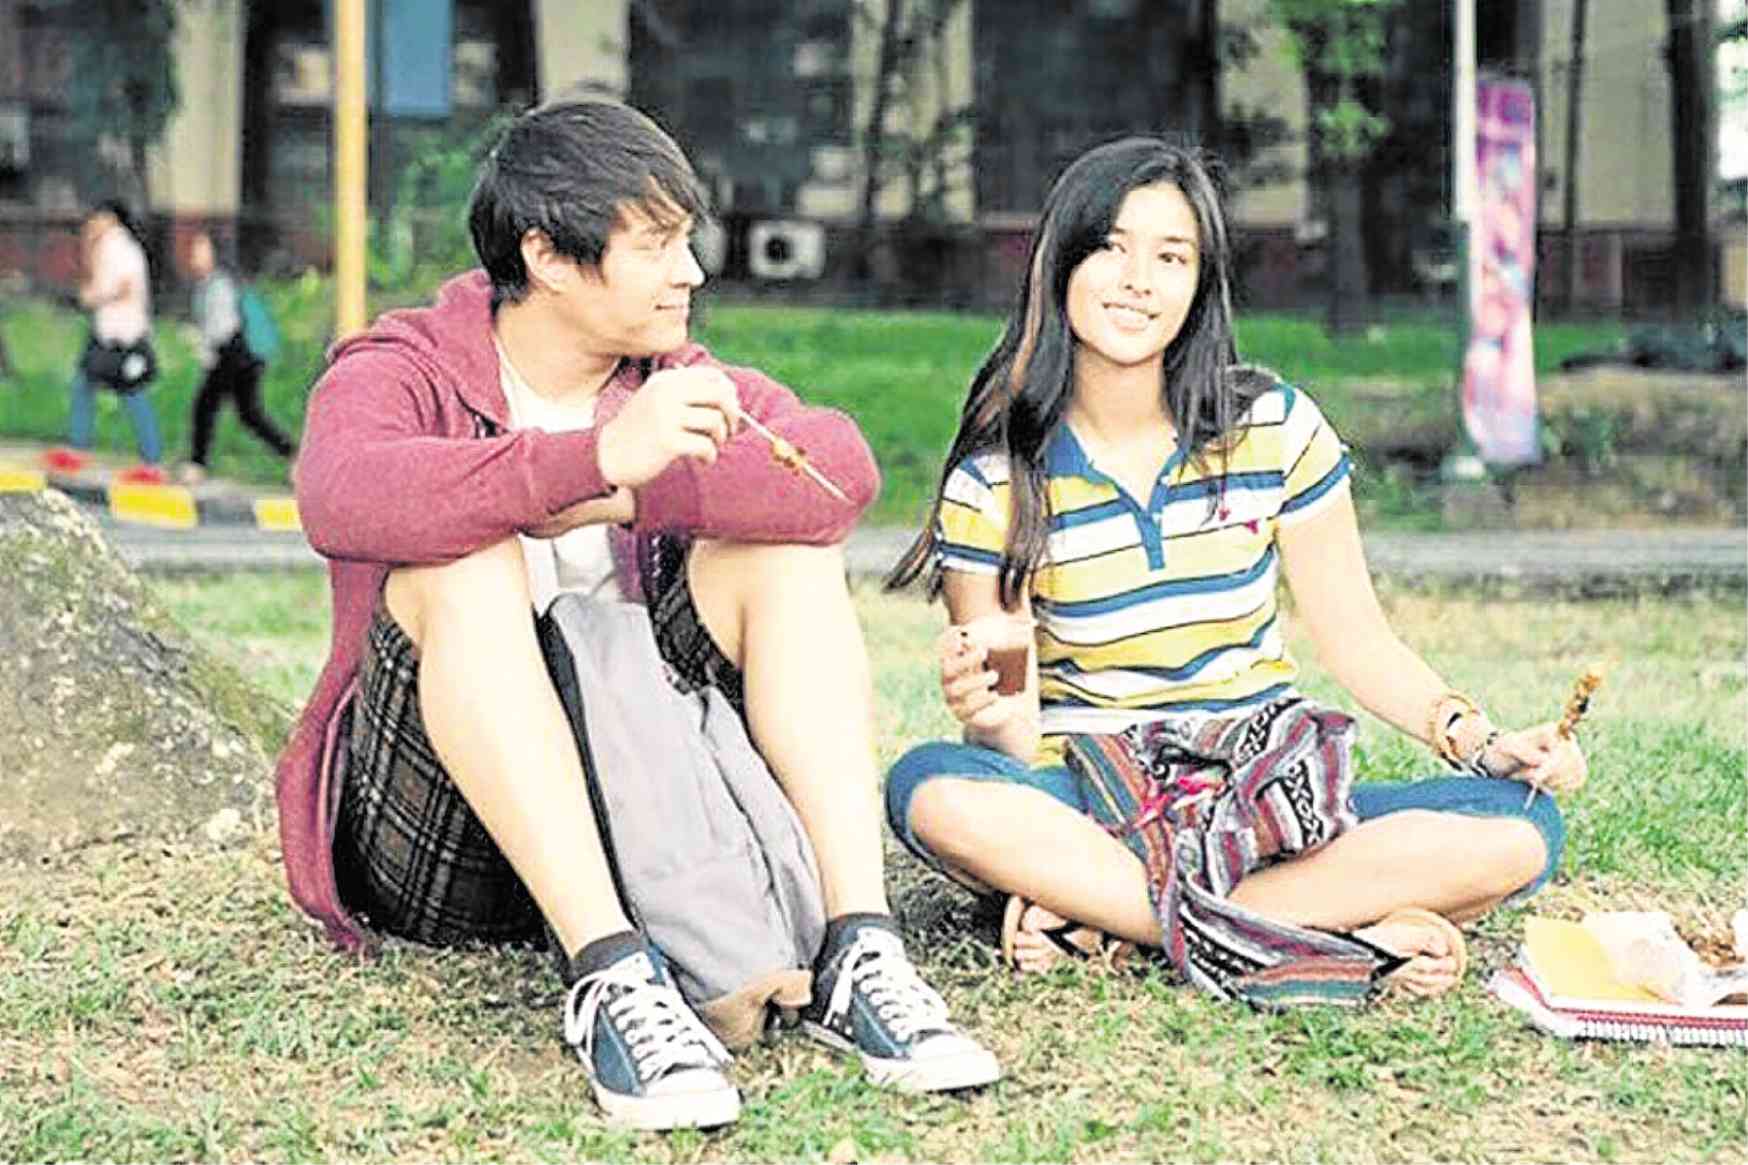 ‘Alone/Together’ makes over P265 million